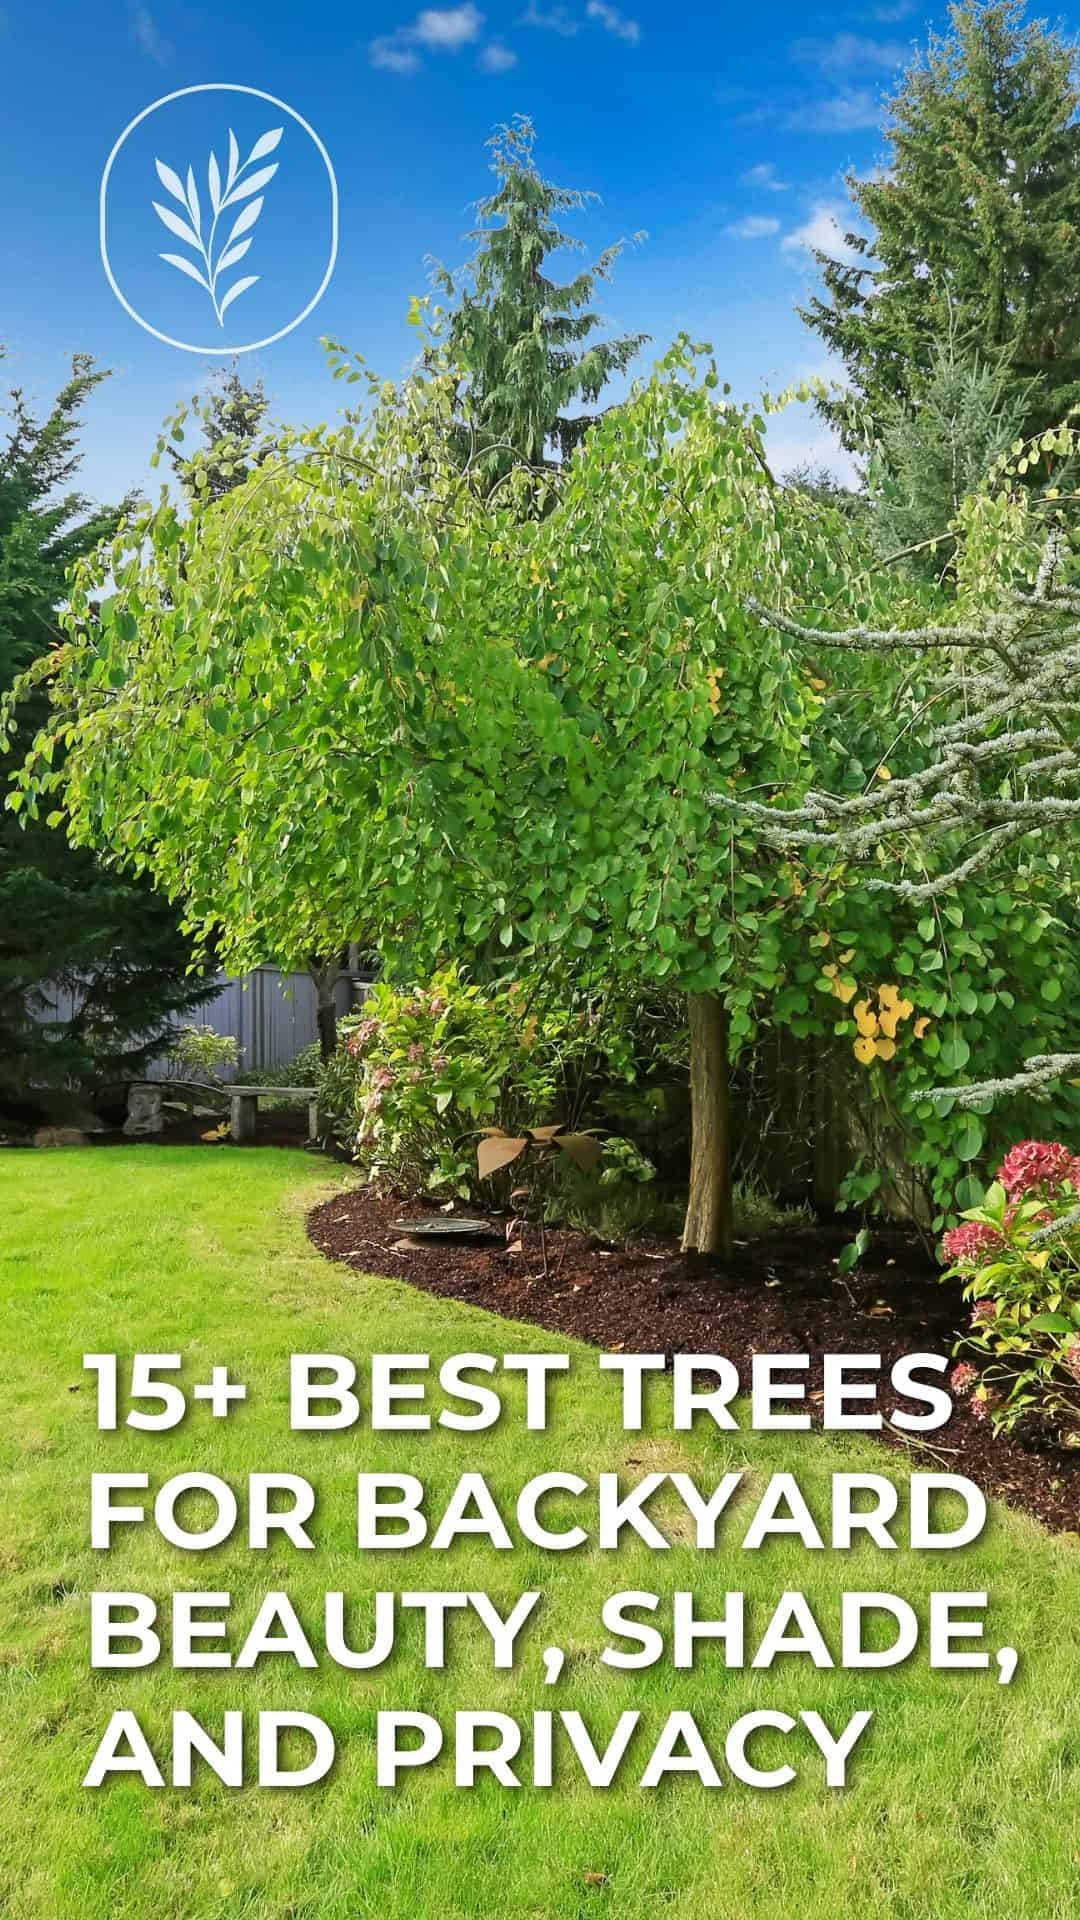 15+ best trees for backyard beauty, shade, and privacy - story via @home4theharvest